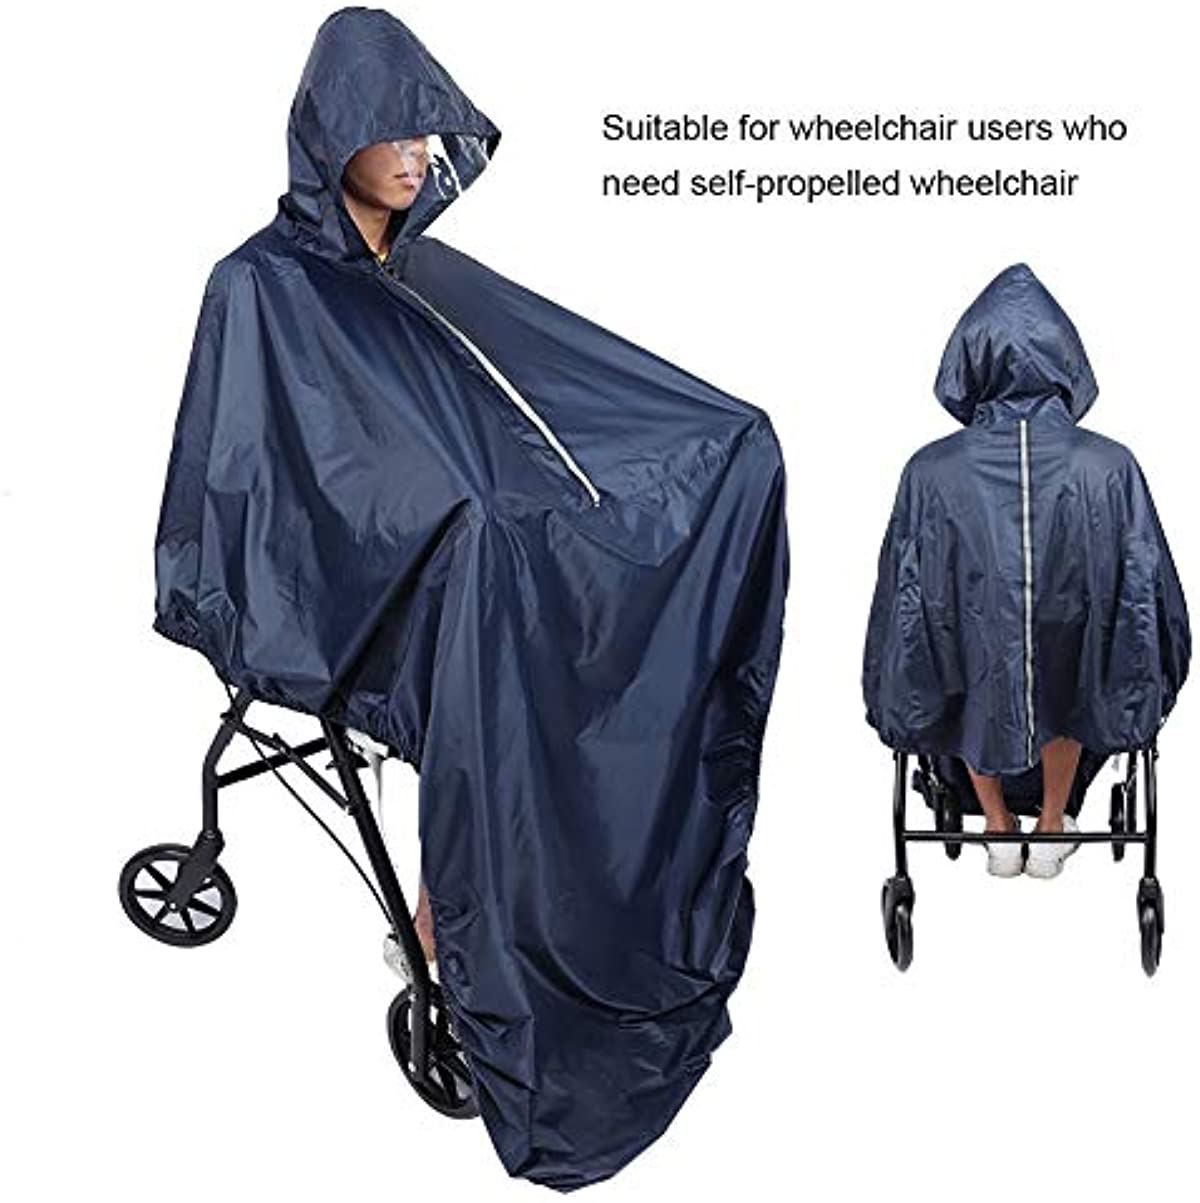 Hooded Waterproof Wheelchair Poncho, Soft Water & Tear Resistant Rain Protection Cape Over Knee Coverage Wheelchair Rain Coat Cover Raincoat One Size For Men & Women